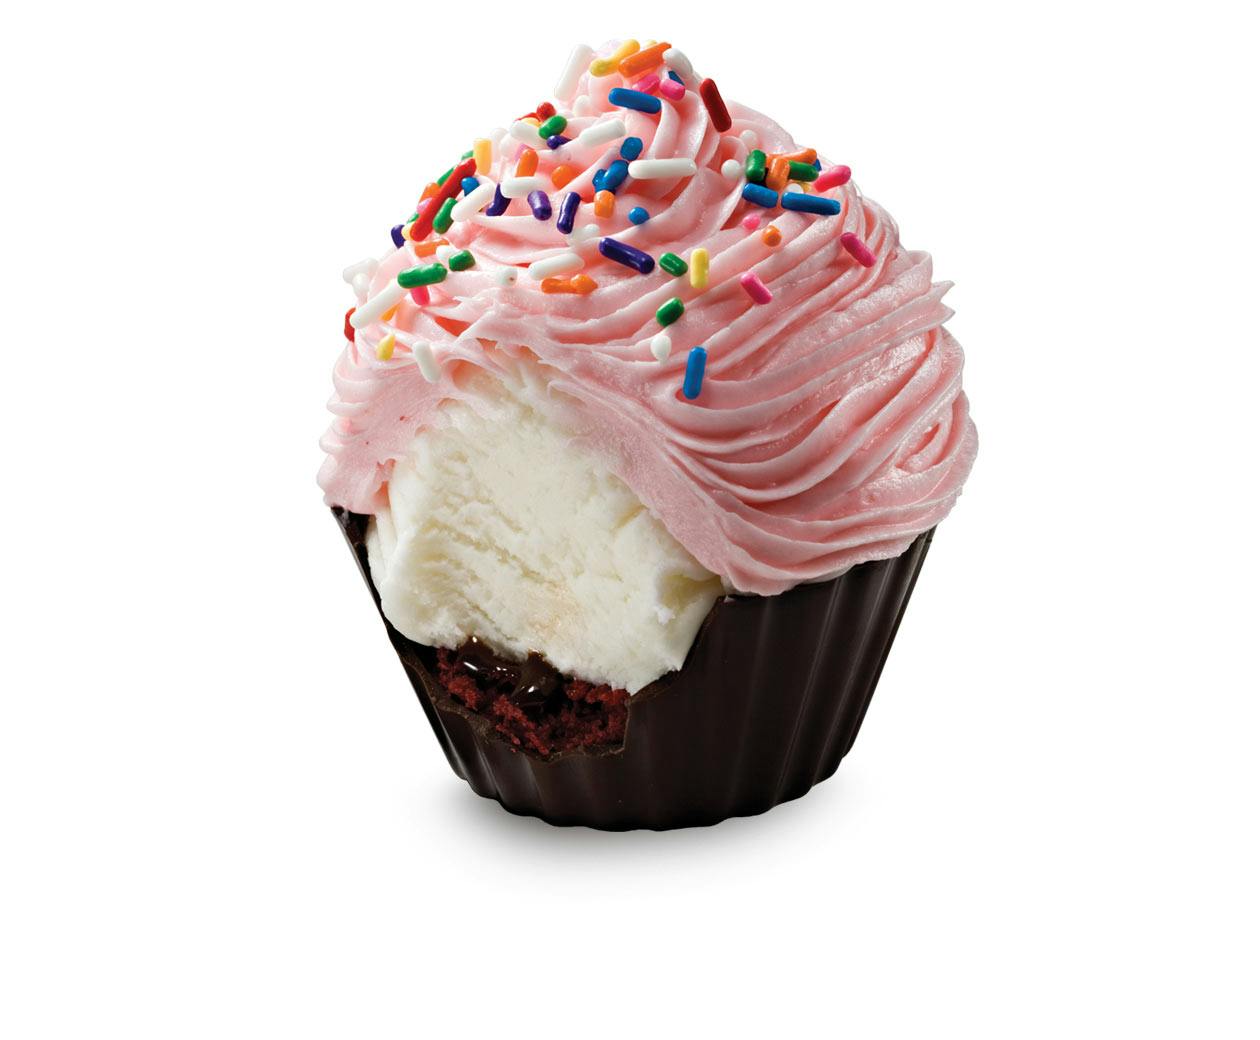 6 Pack Cake Batter Deluxe Cupcakes from Cold Stone Creamery - Green Bay in Green Bay, WI